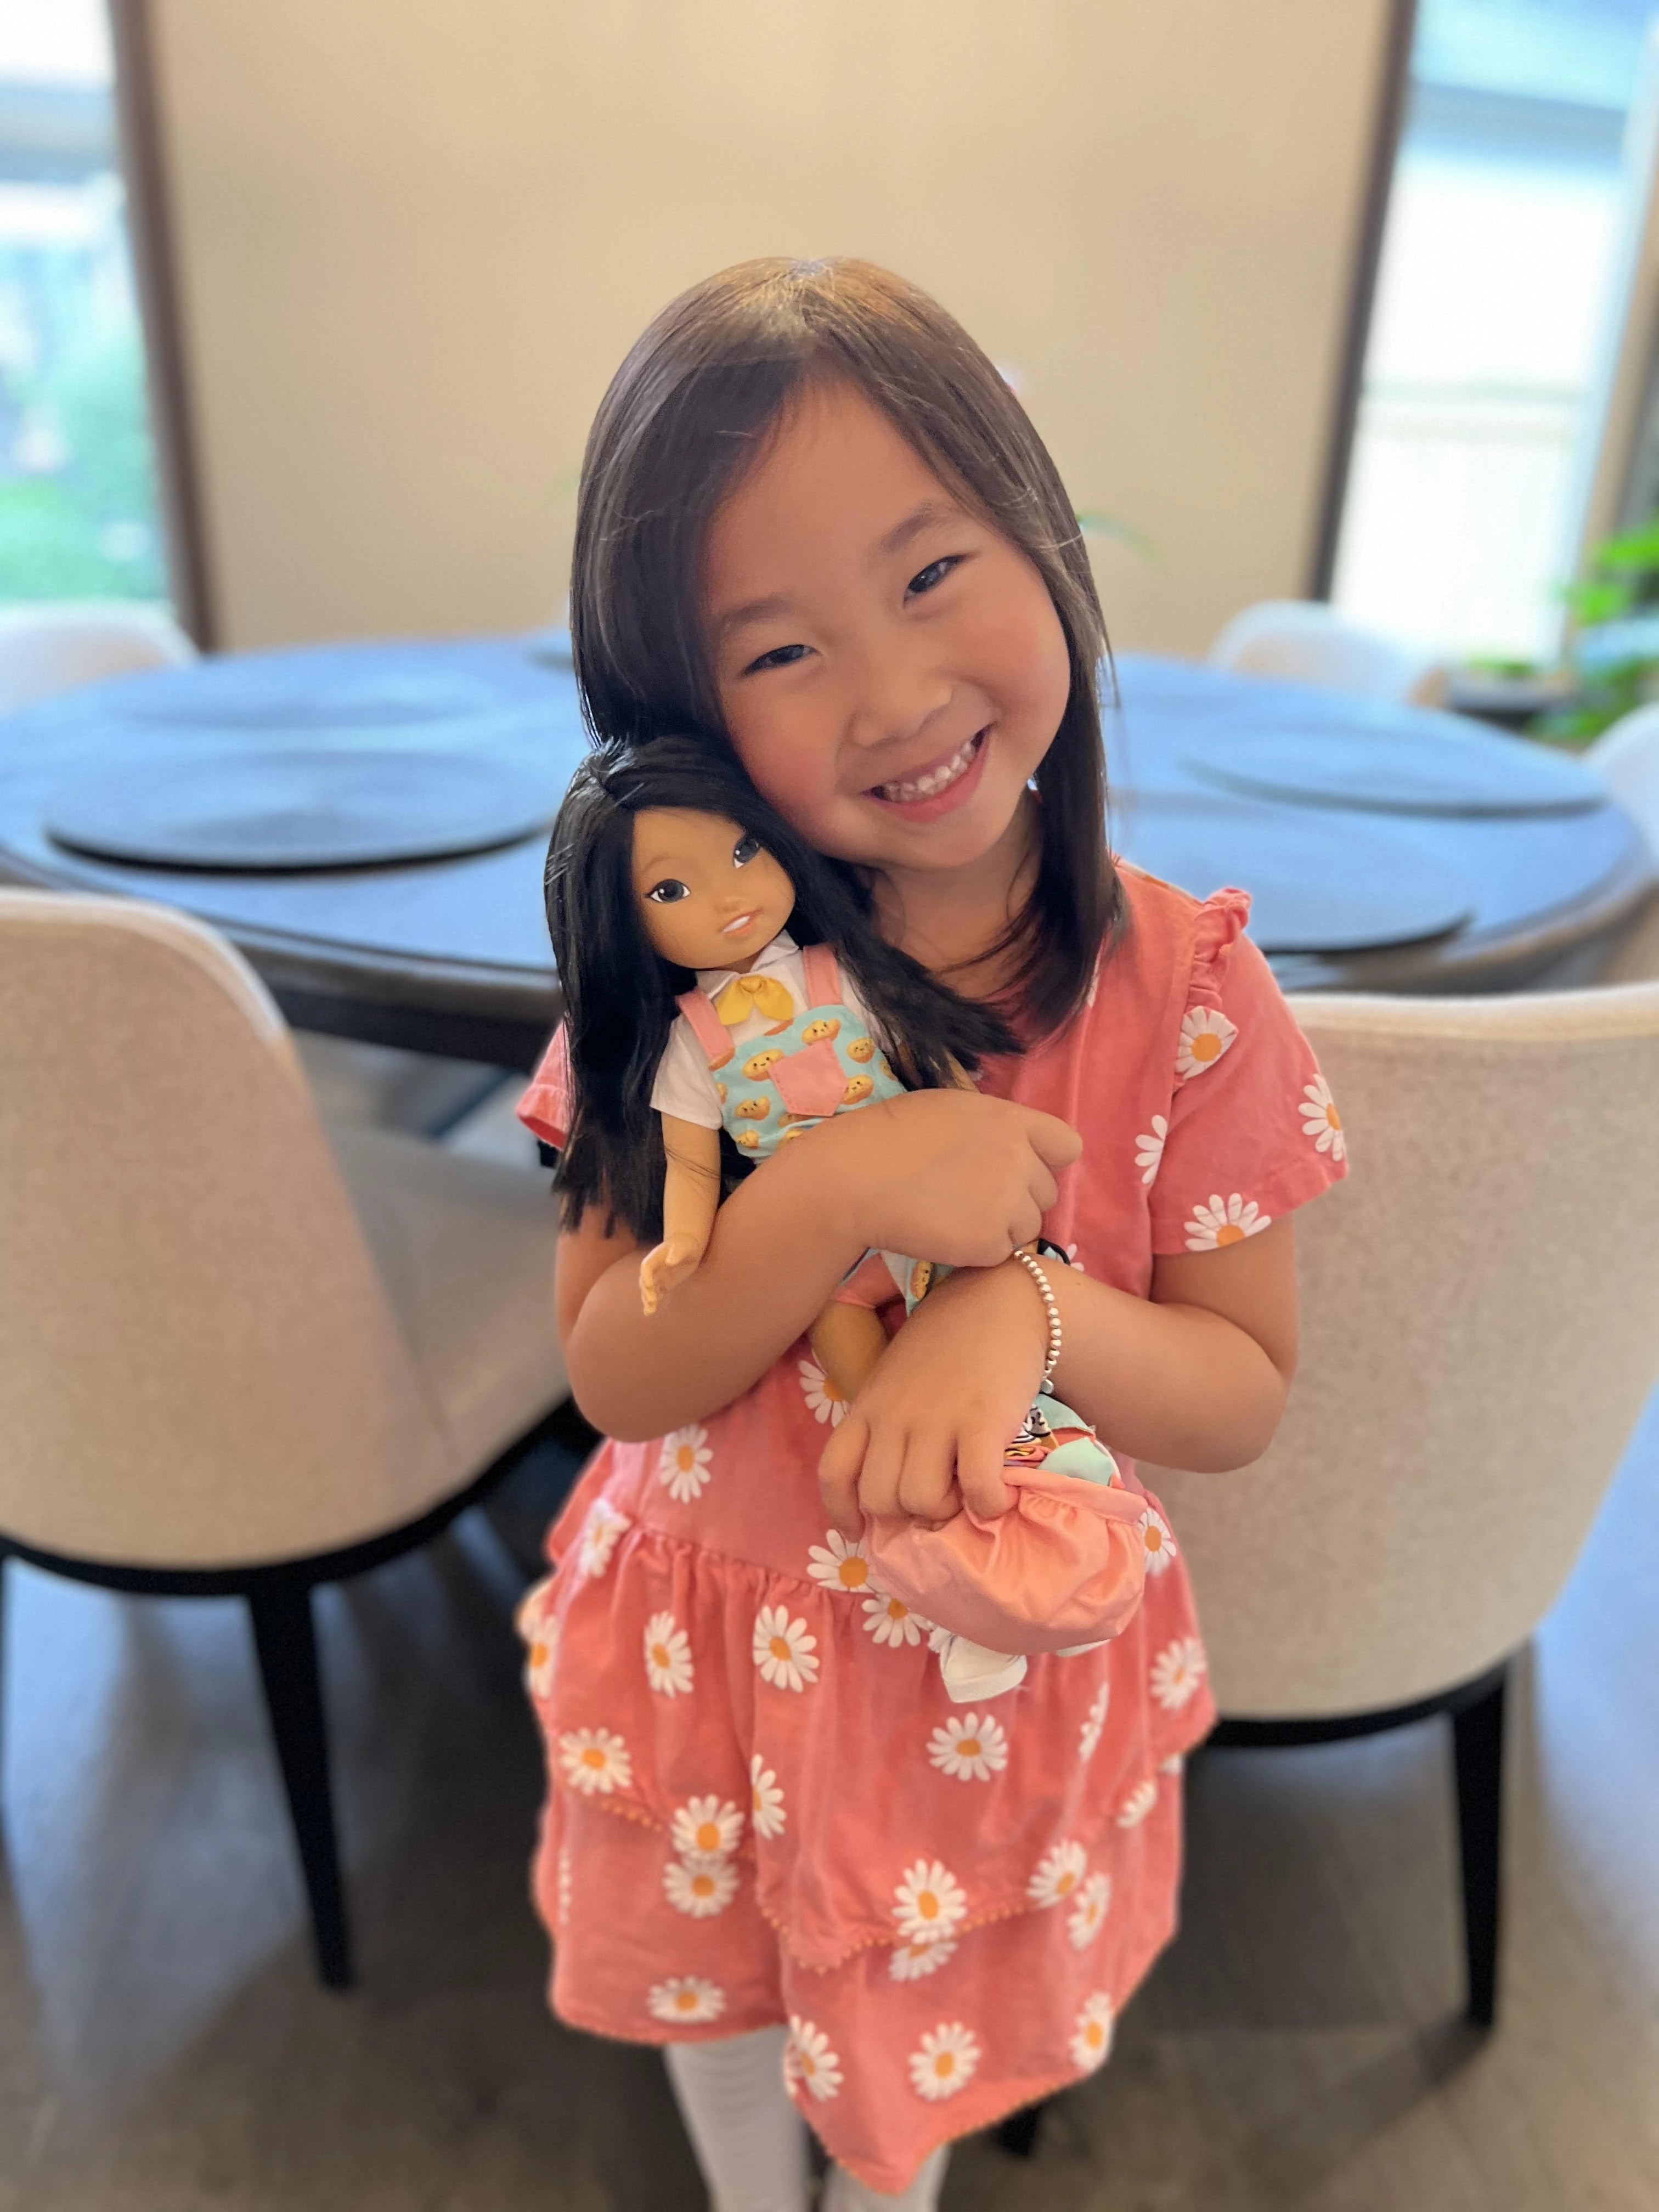 An Asian girl smiling while holding a Jilly doll